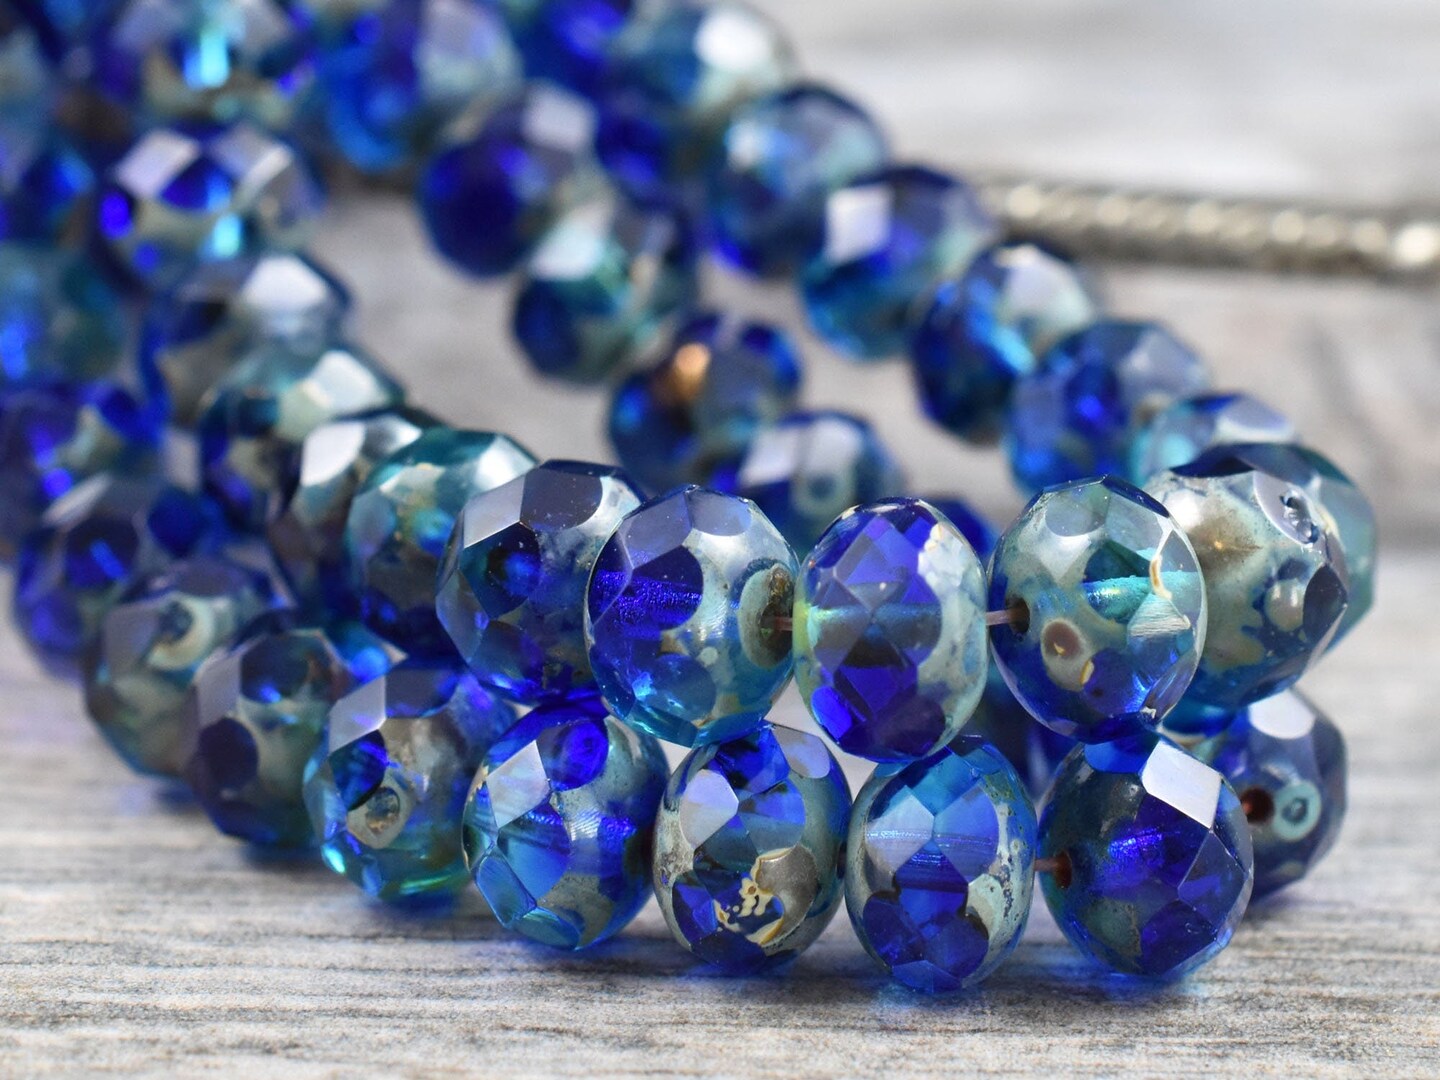 Sapphire Aqua Picasso Fire Polished Rondelle Beads - 5x7mm or 6x8mm